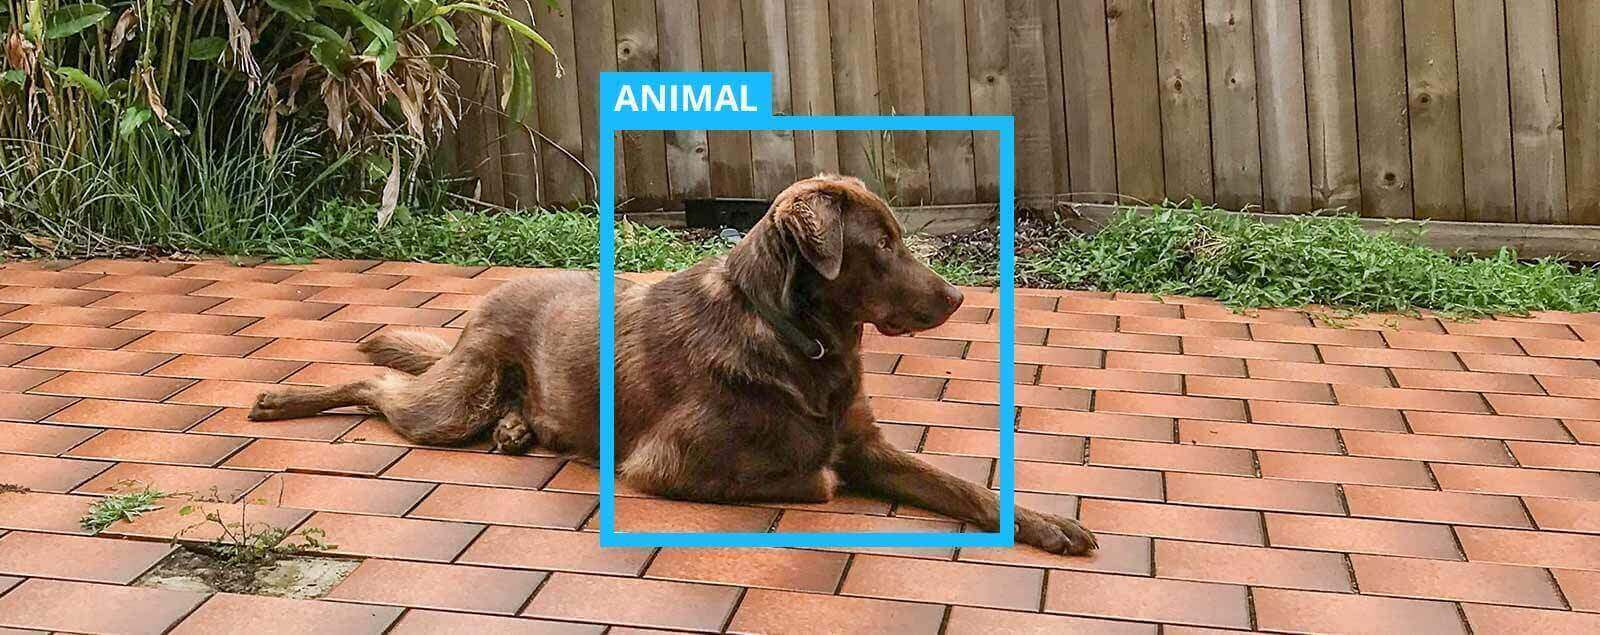 Labrador dog laid in garden with box surrounding it saying animal